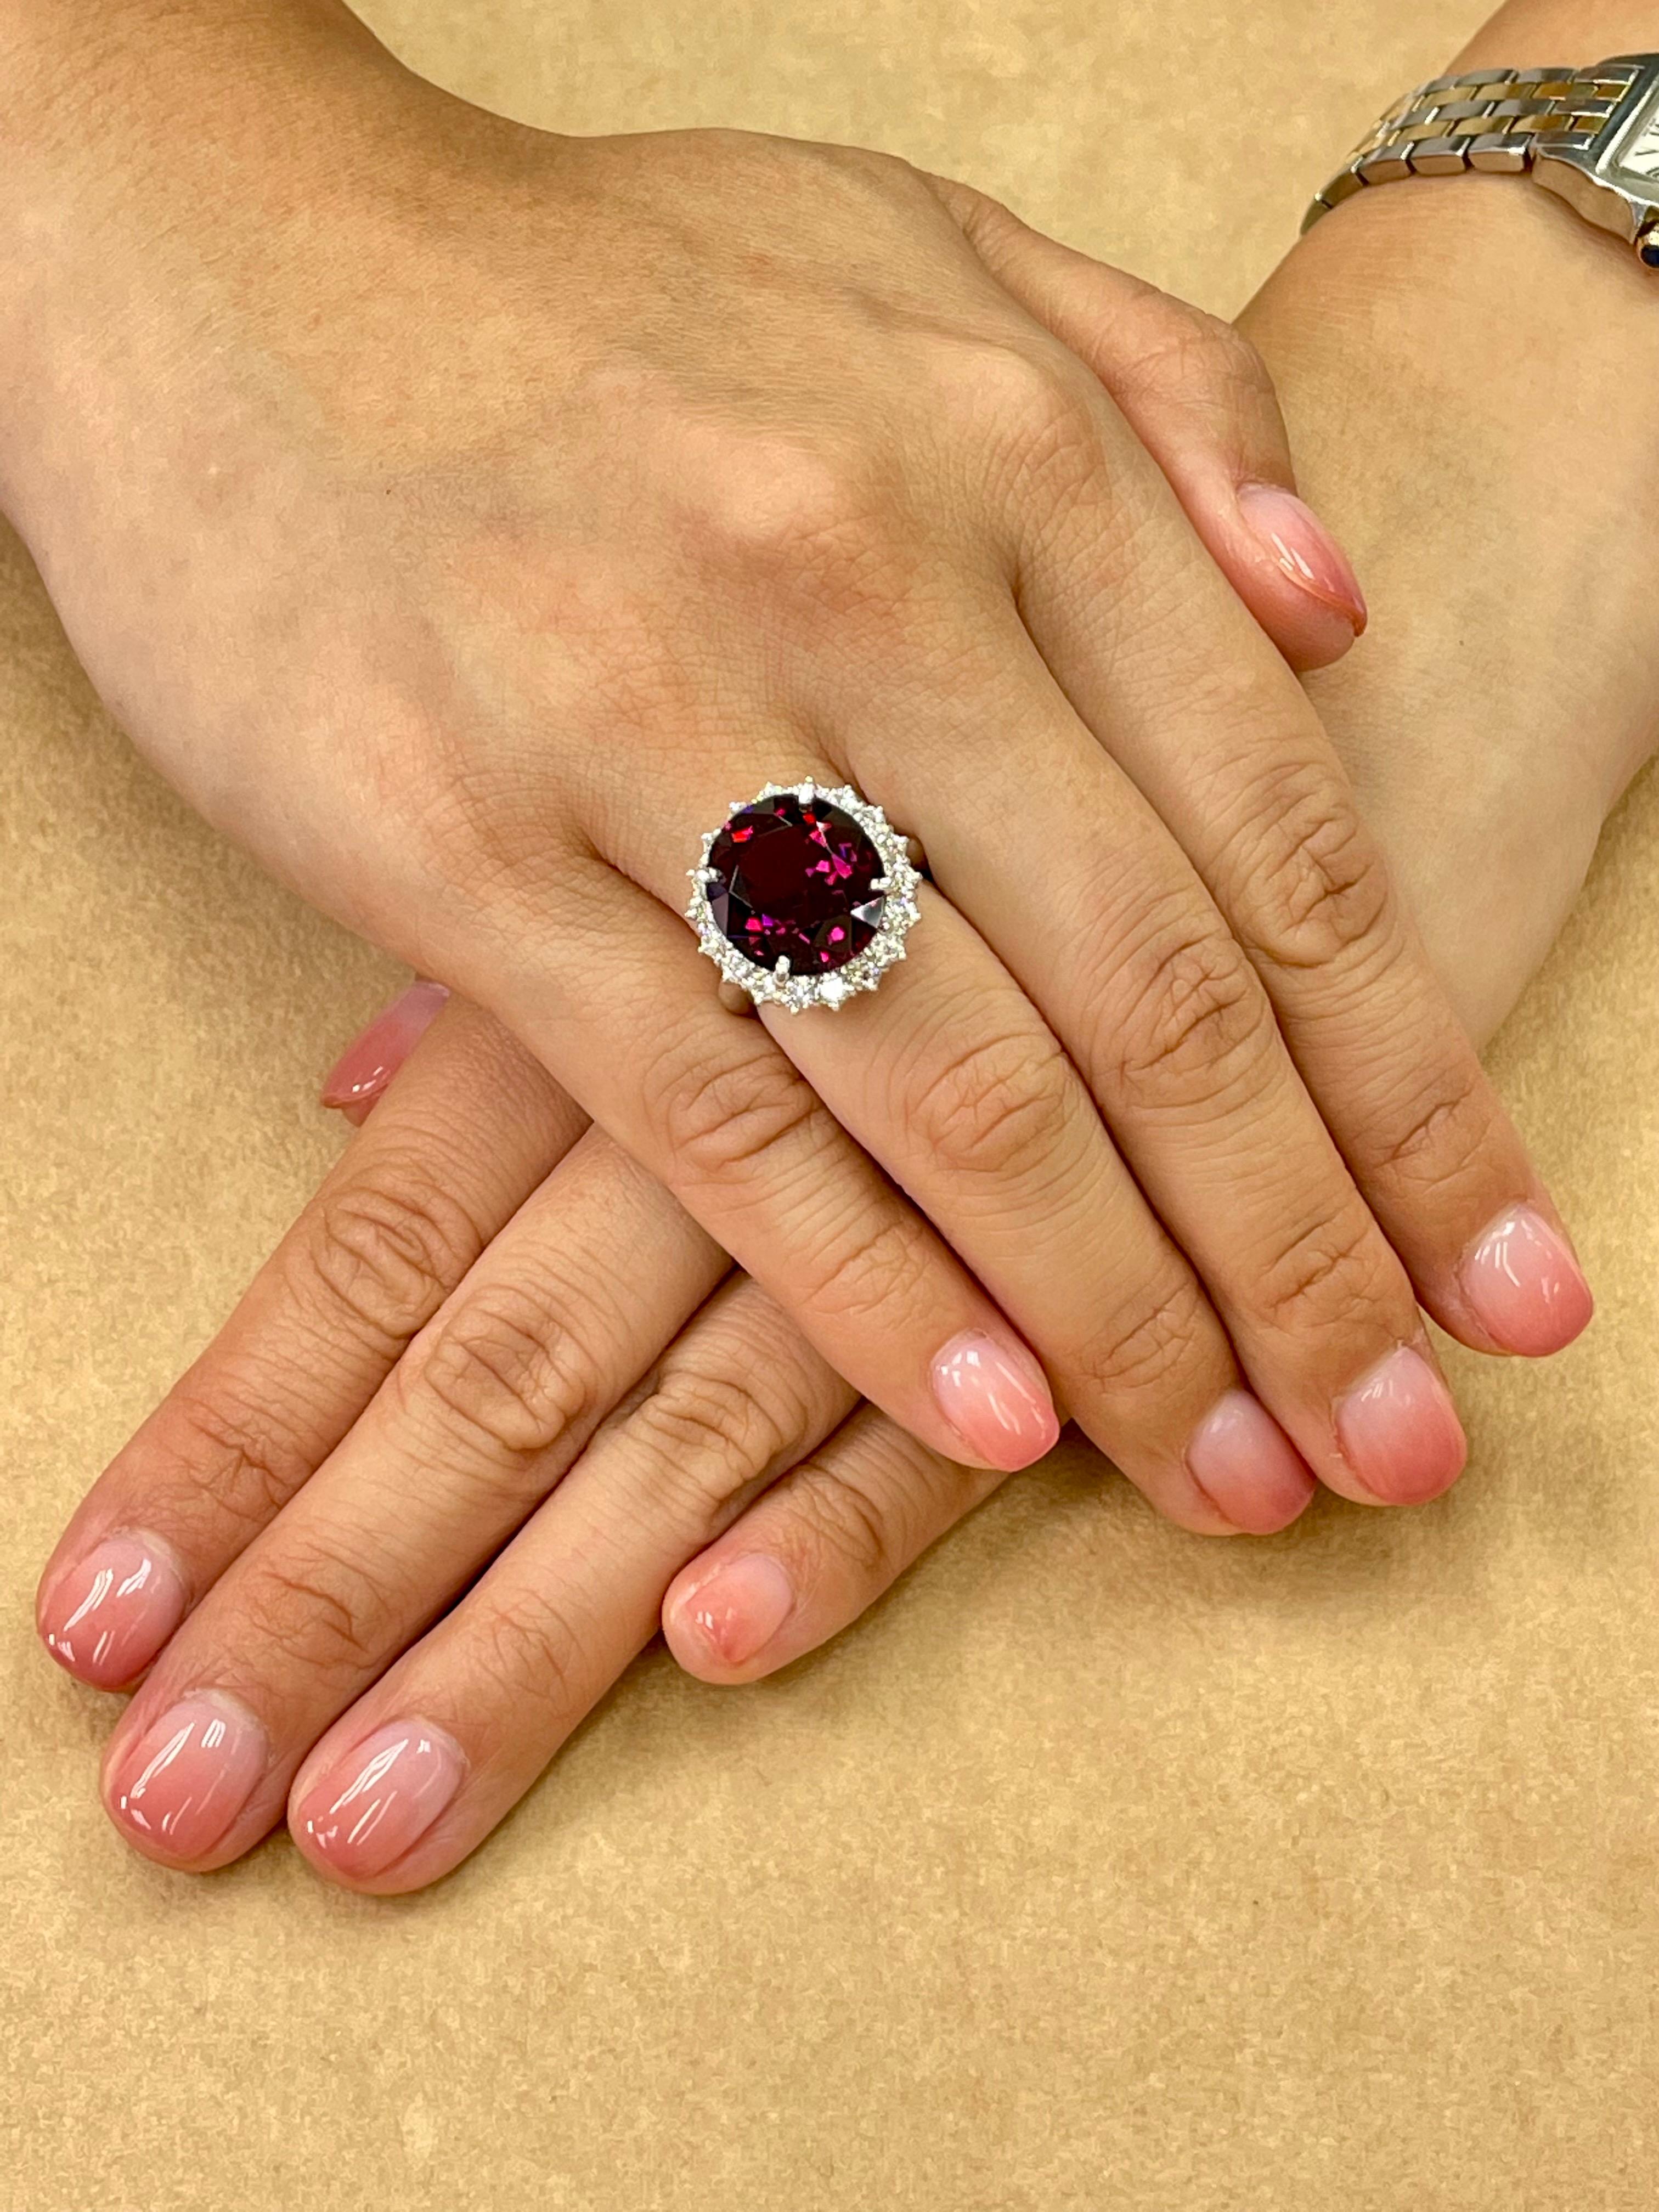 Please check out the HD video. Nothing much to say about this ring except we guarantee it to be much nicer than any of the photos or video. Here is an oversized Rhodolite Garnet ring (11.76cts) The ring is set in platinum and diamonds. There are